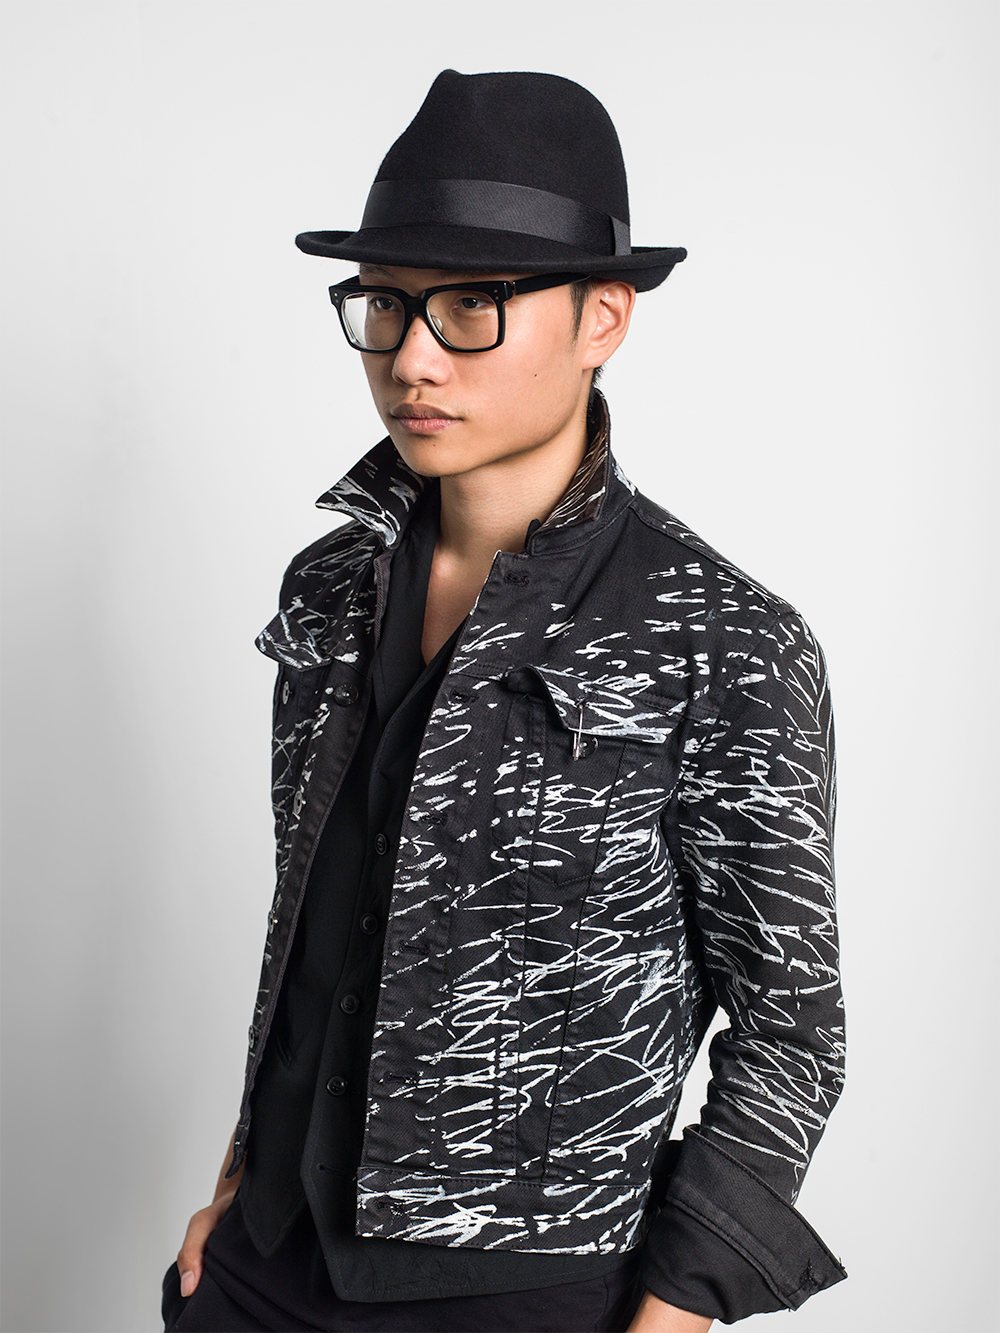 Student style: Henry Lin – The Connector